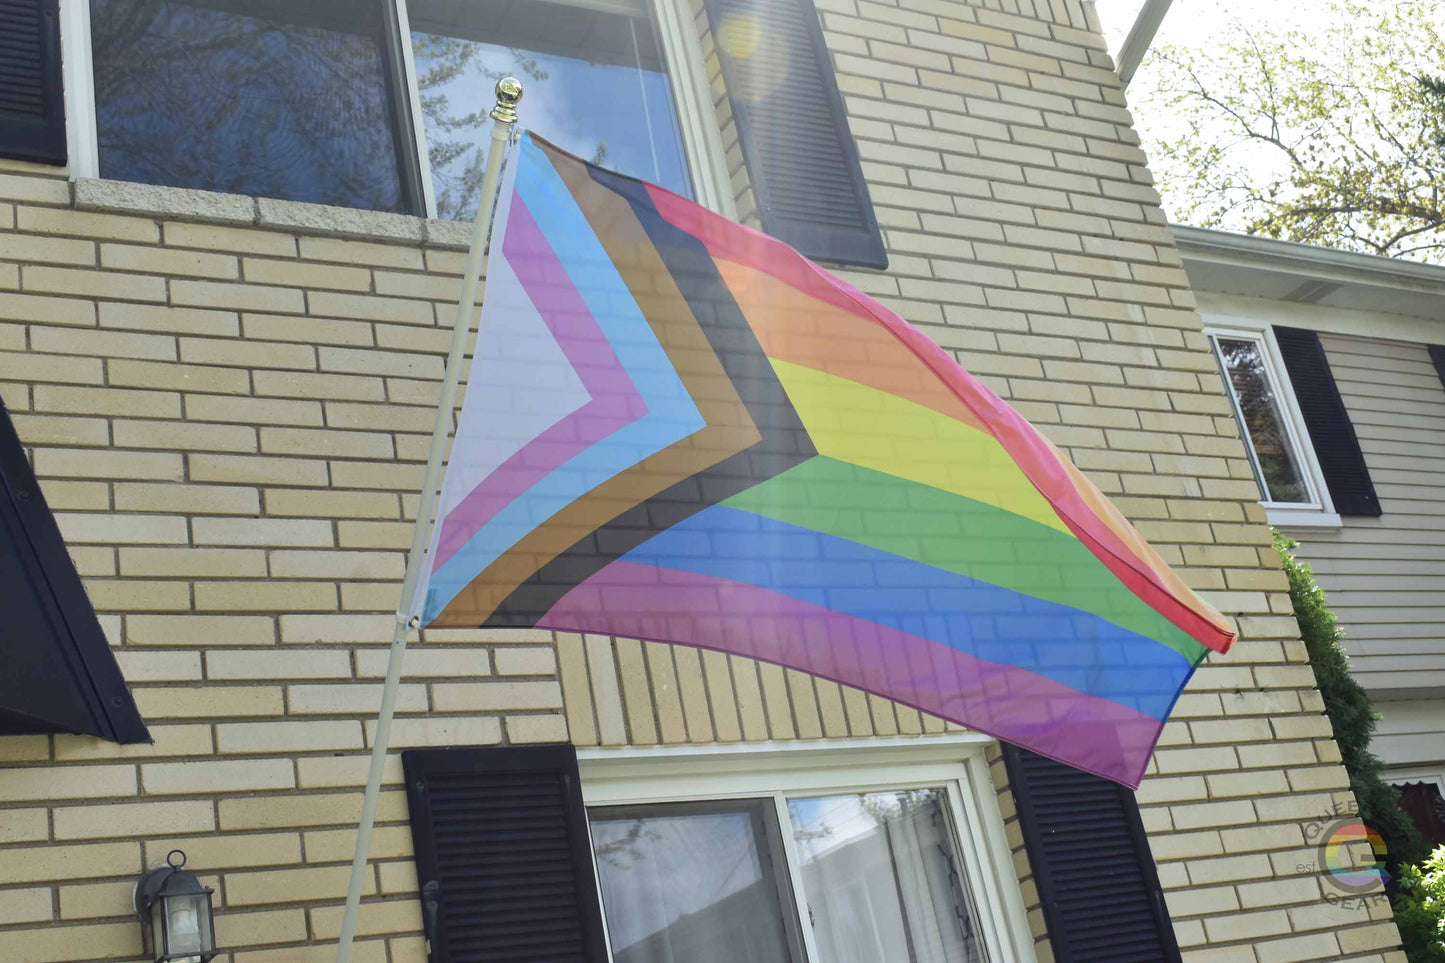 3’x5’ progress pride flag hanging from a flagpole on the outside of a light brick house with dark shutters